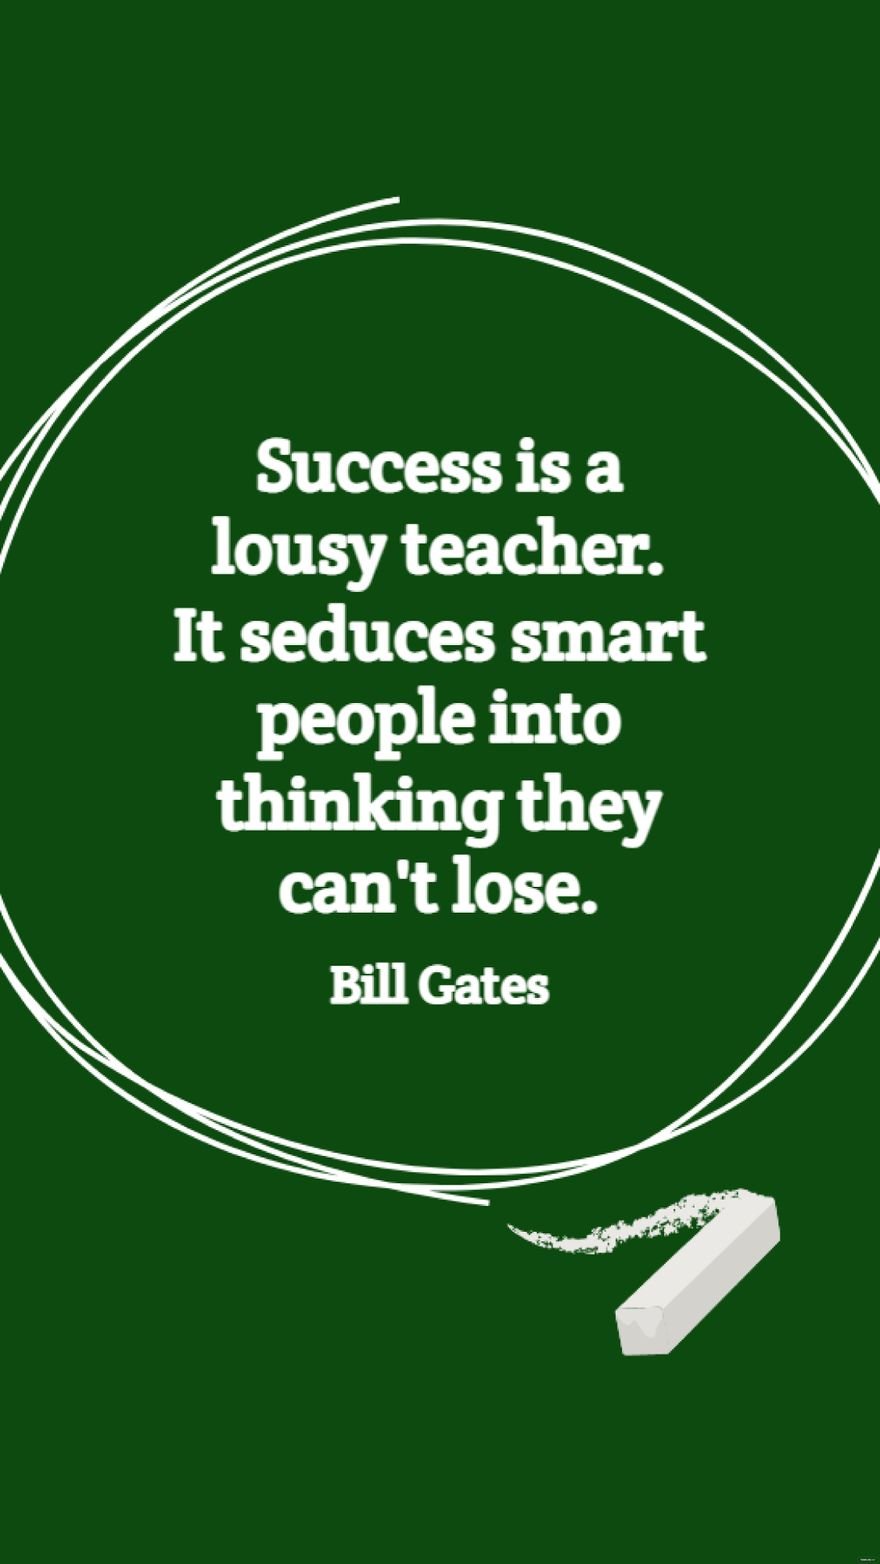 Bill Gates - Success is a lousy teacher. It seduces smart people into thinking they can't lose.